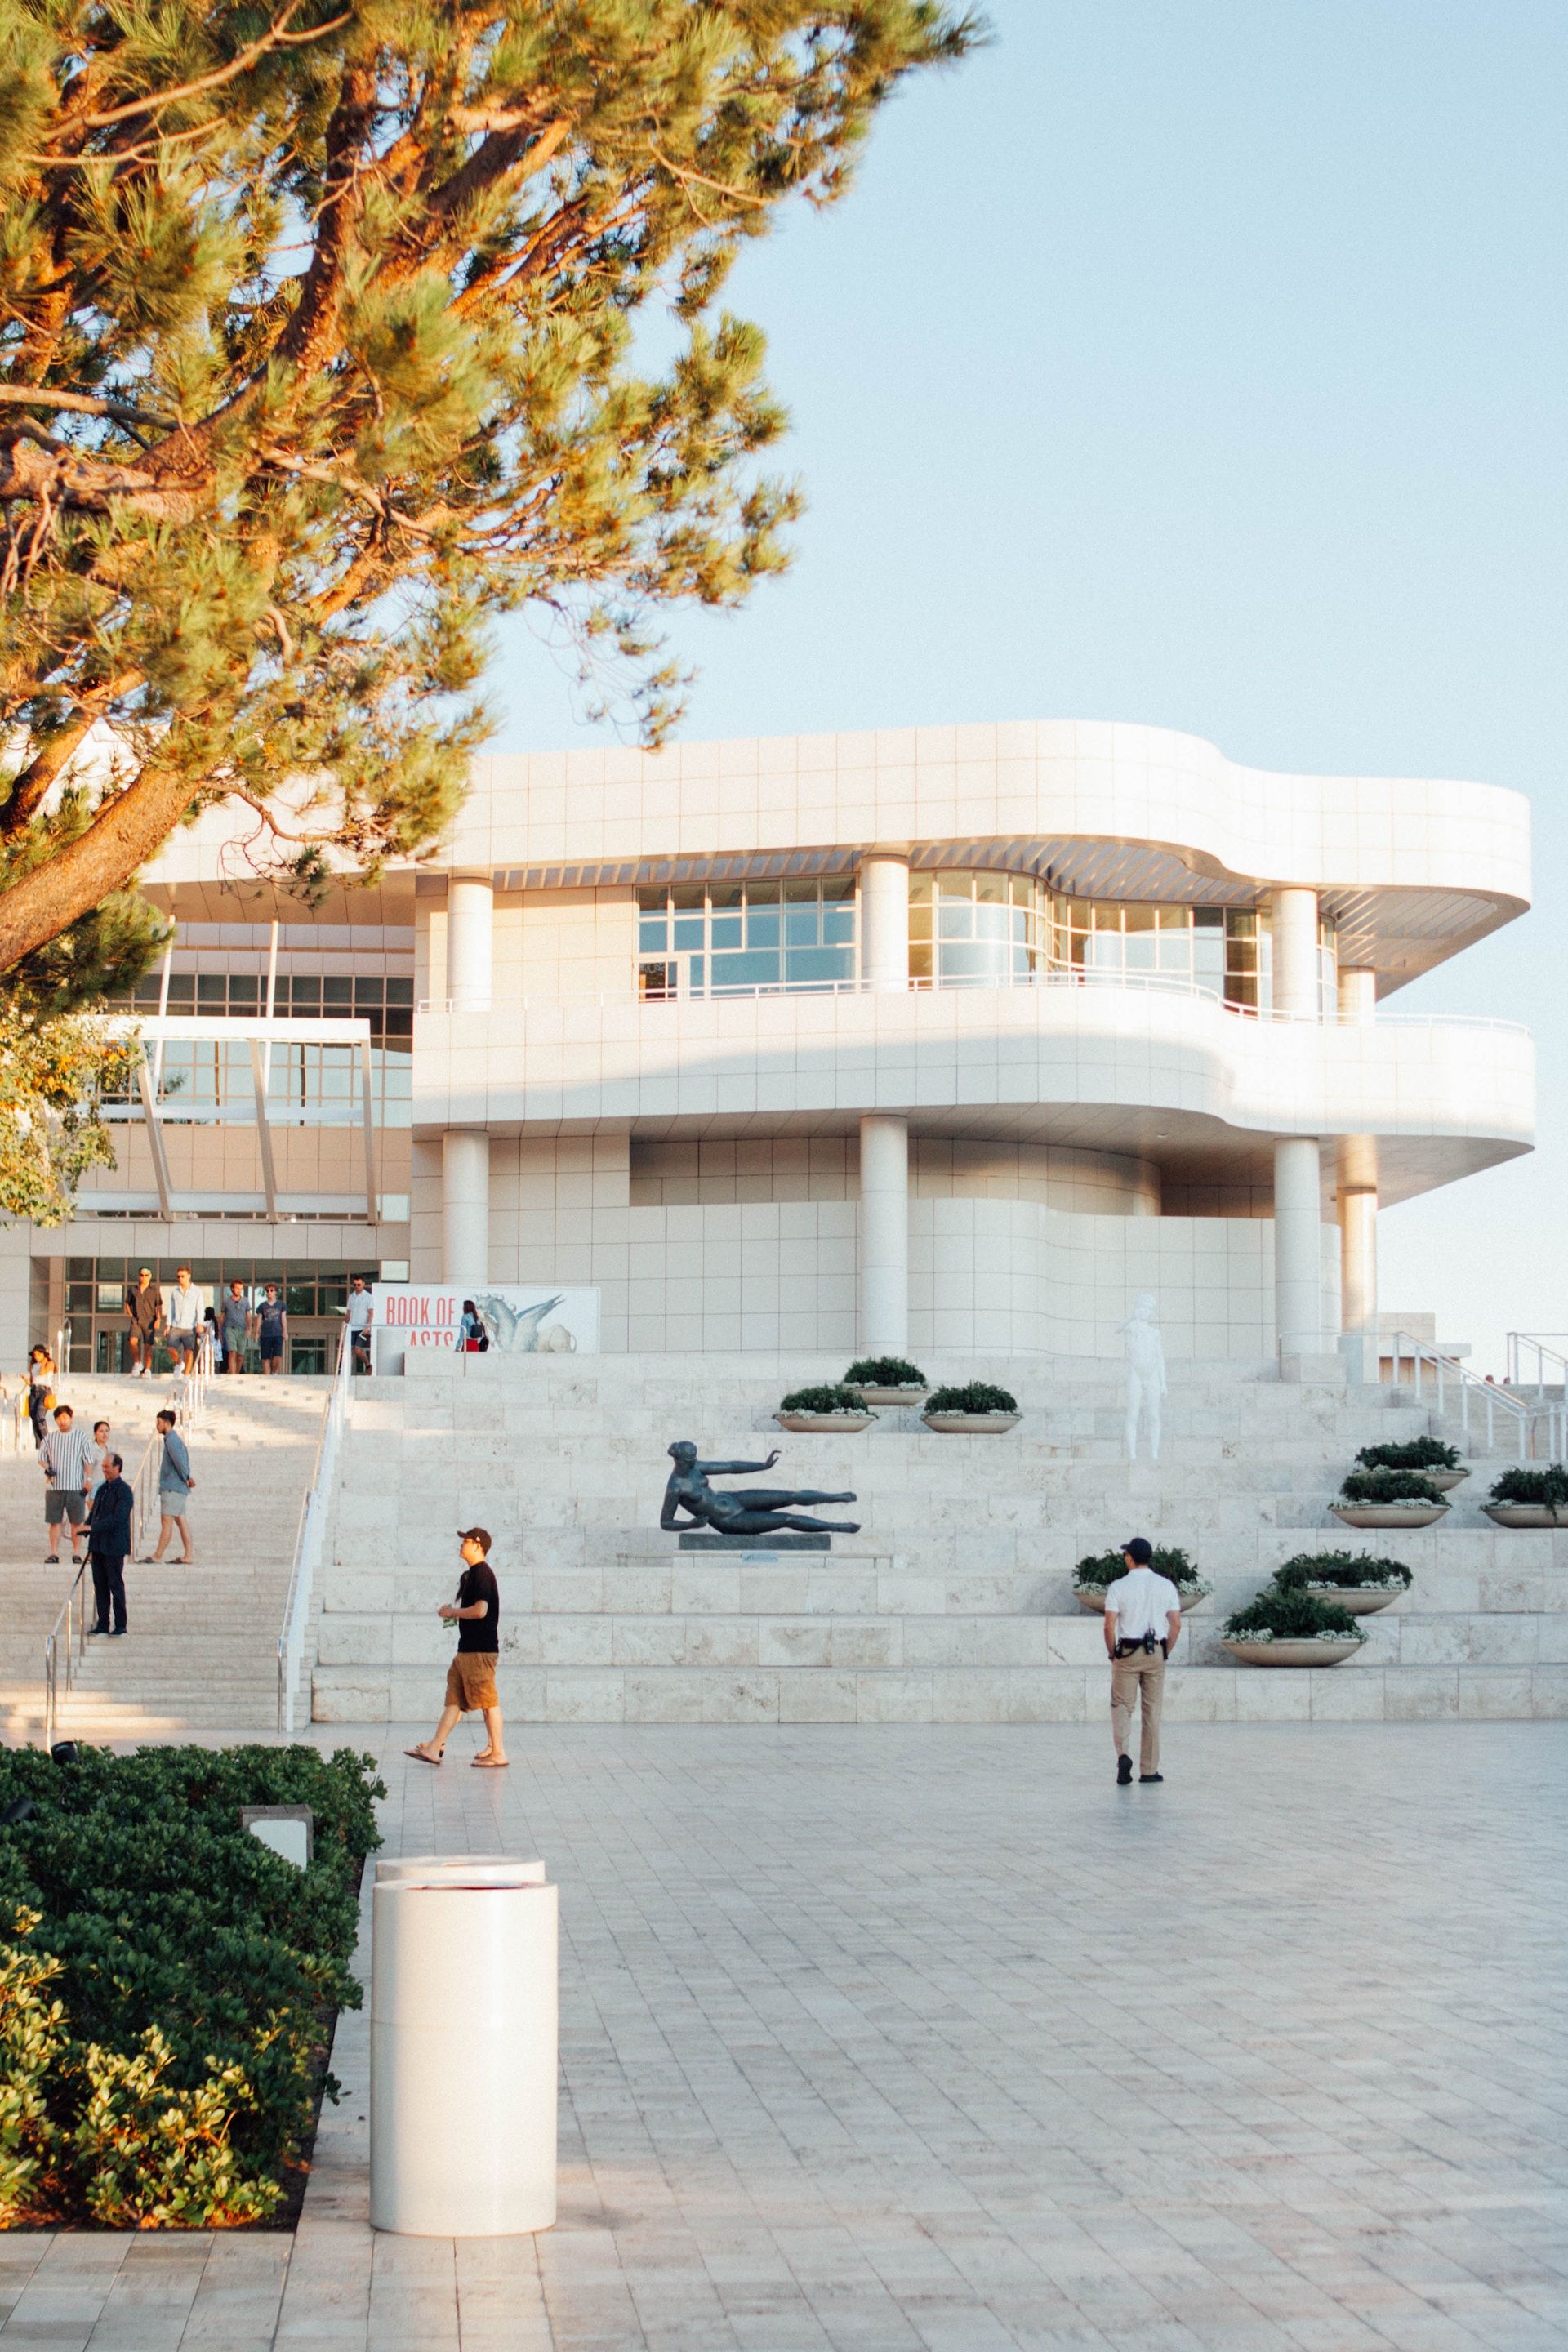 The Getty Centery in Los Angeles